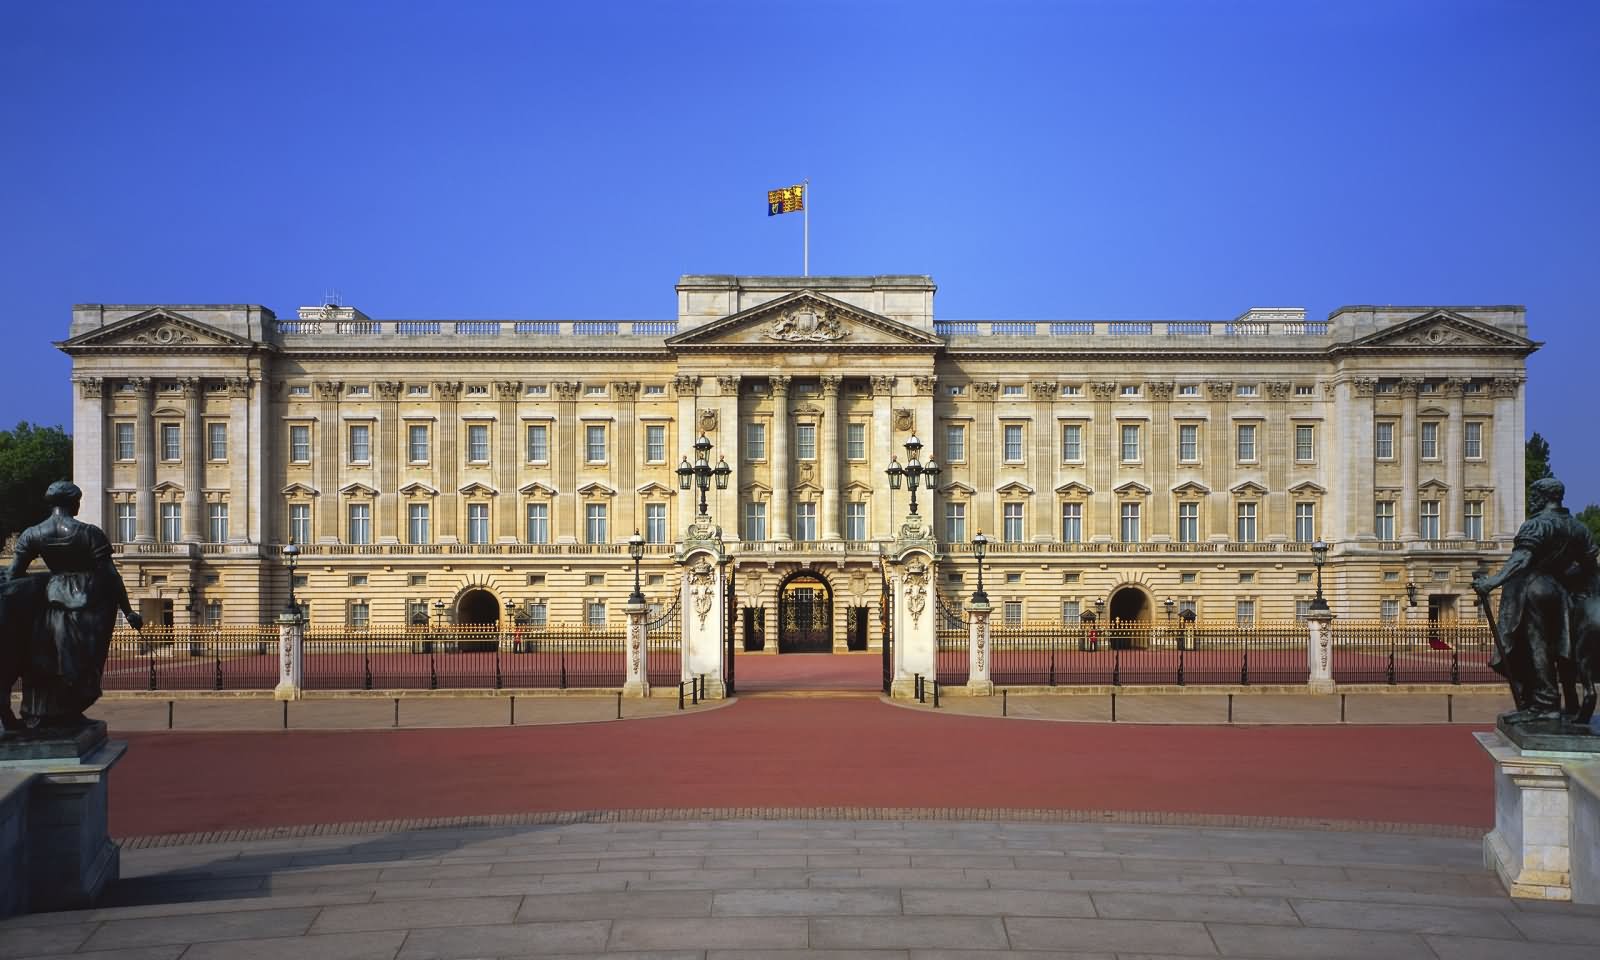 35 Very Beautiful Buckingham Palace, London Pictures And Images